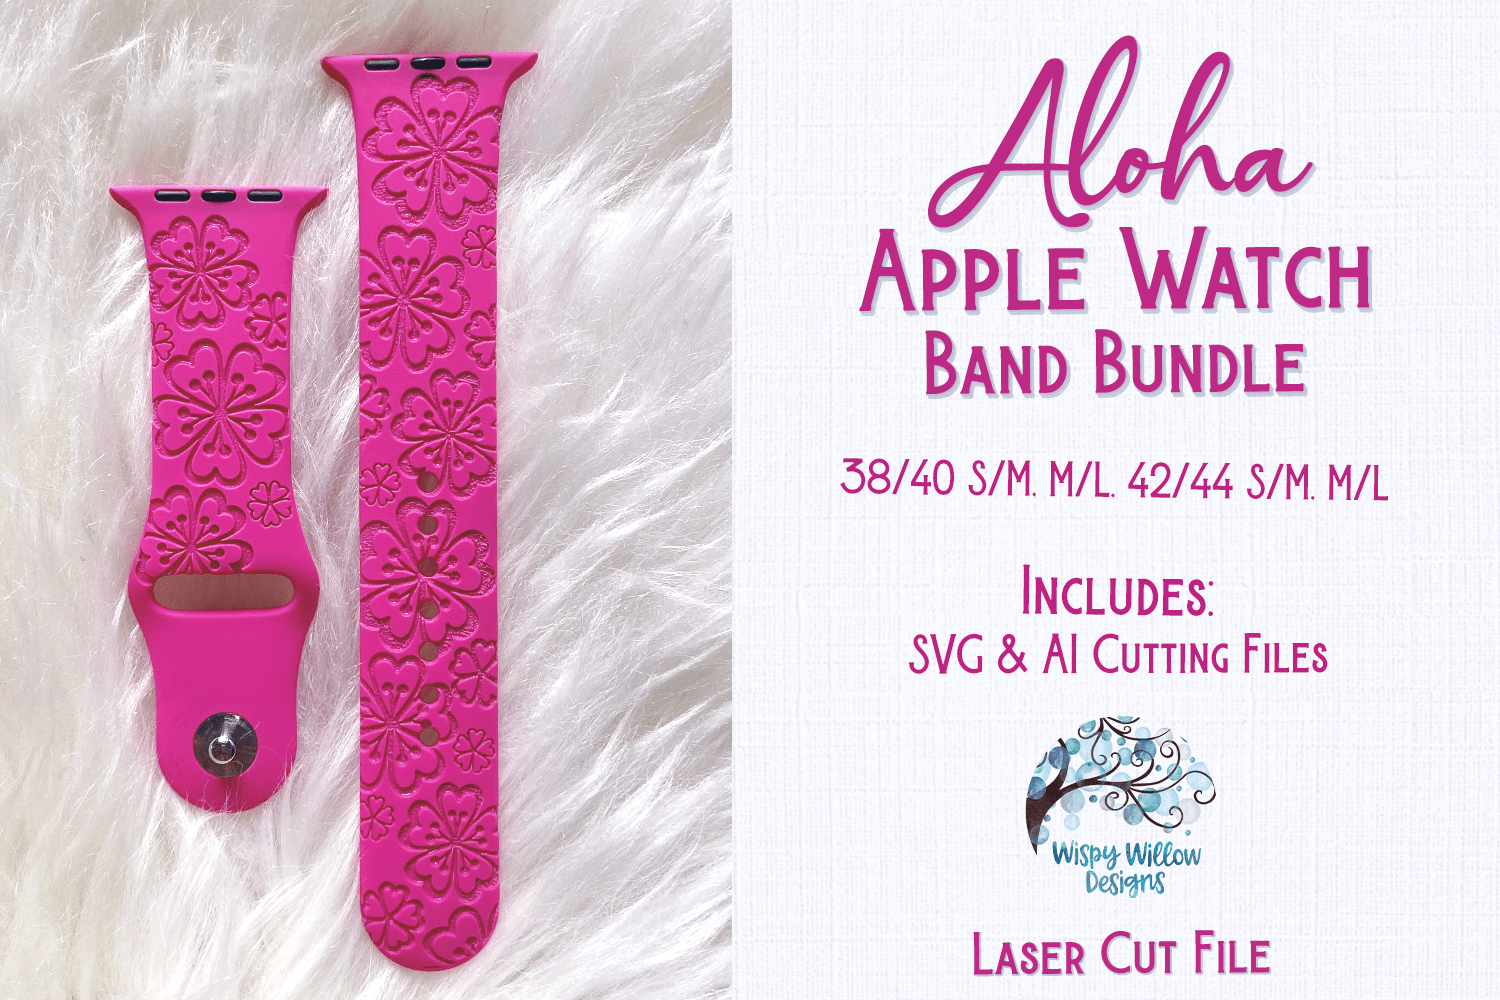 Aloha Floral Watch Band Design for Glowforge or Laser Cutter Wispy Willow Designs Company